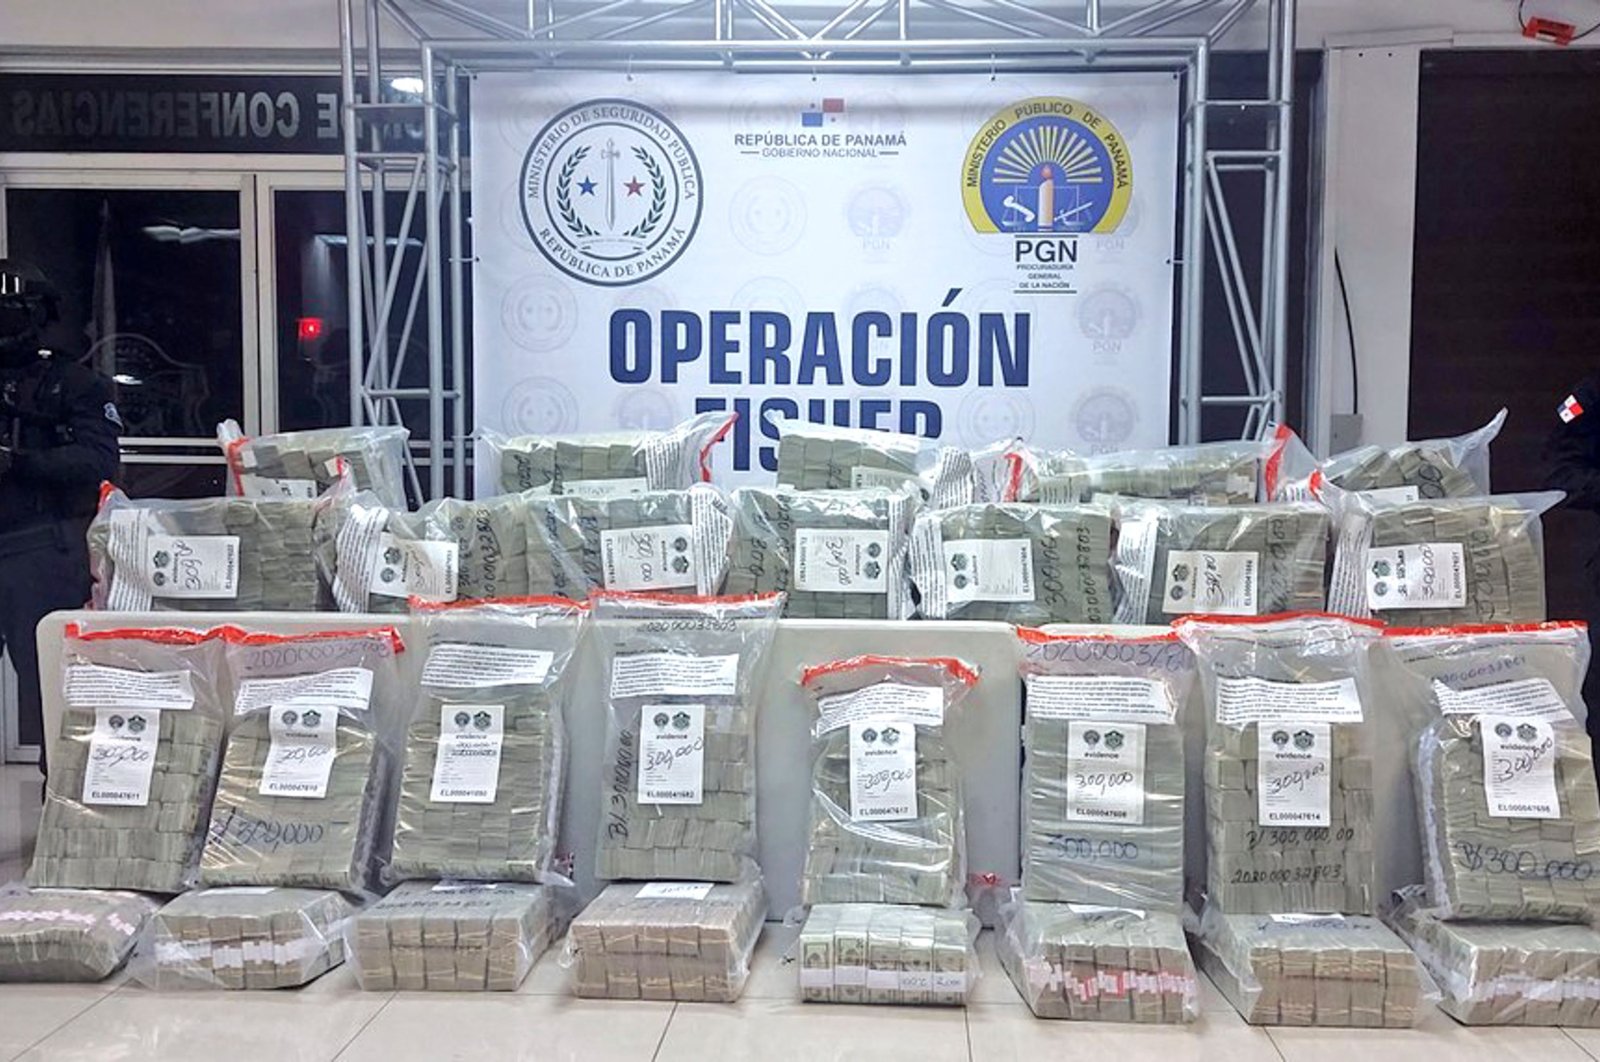 Police personnel guard packages of seized $10 million in U.S. dollar bills seized from an alleged criminal group linked to Colombia&#039;s Clan del Golfo cartel, Colon, Panama, Dec. 2, 2021. (AFP Photo / Panama&#039;s National Police Press Office)